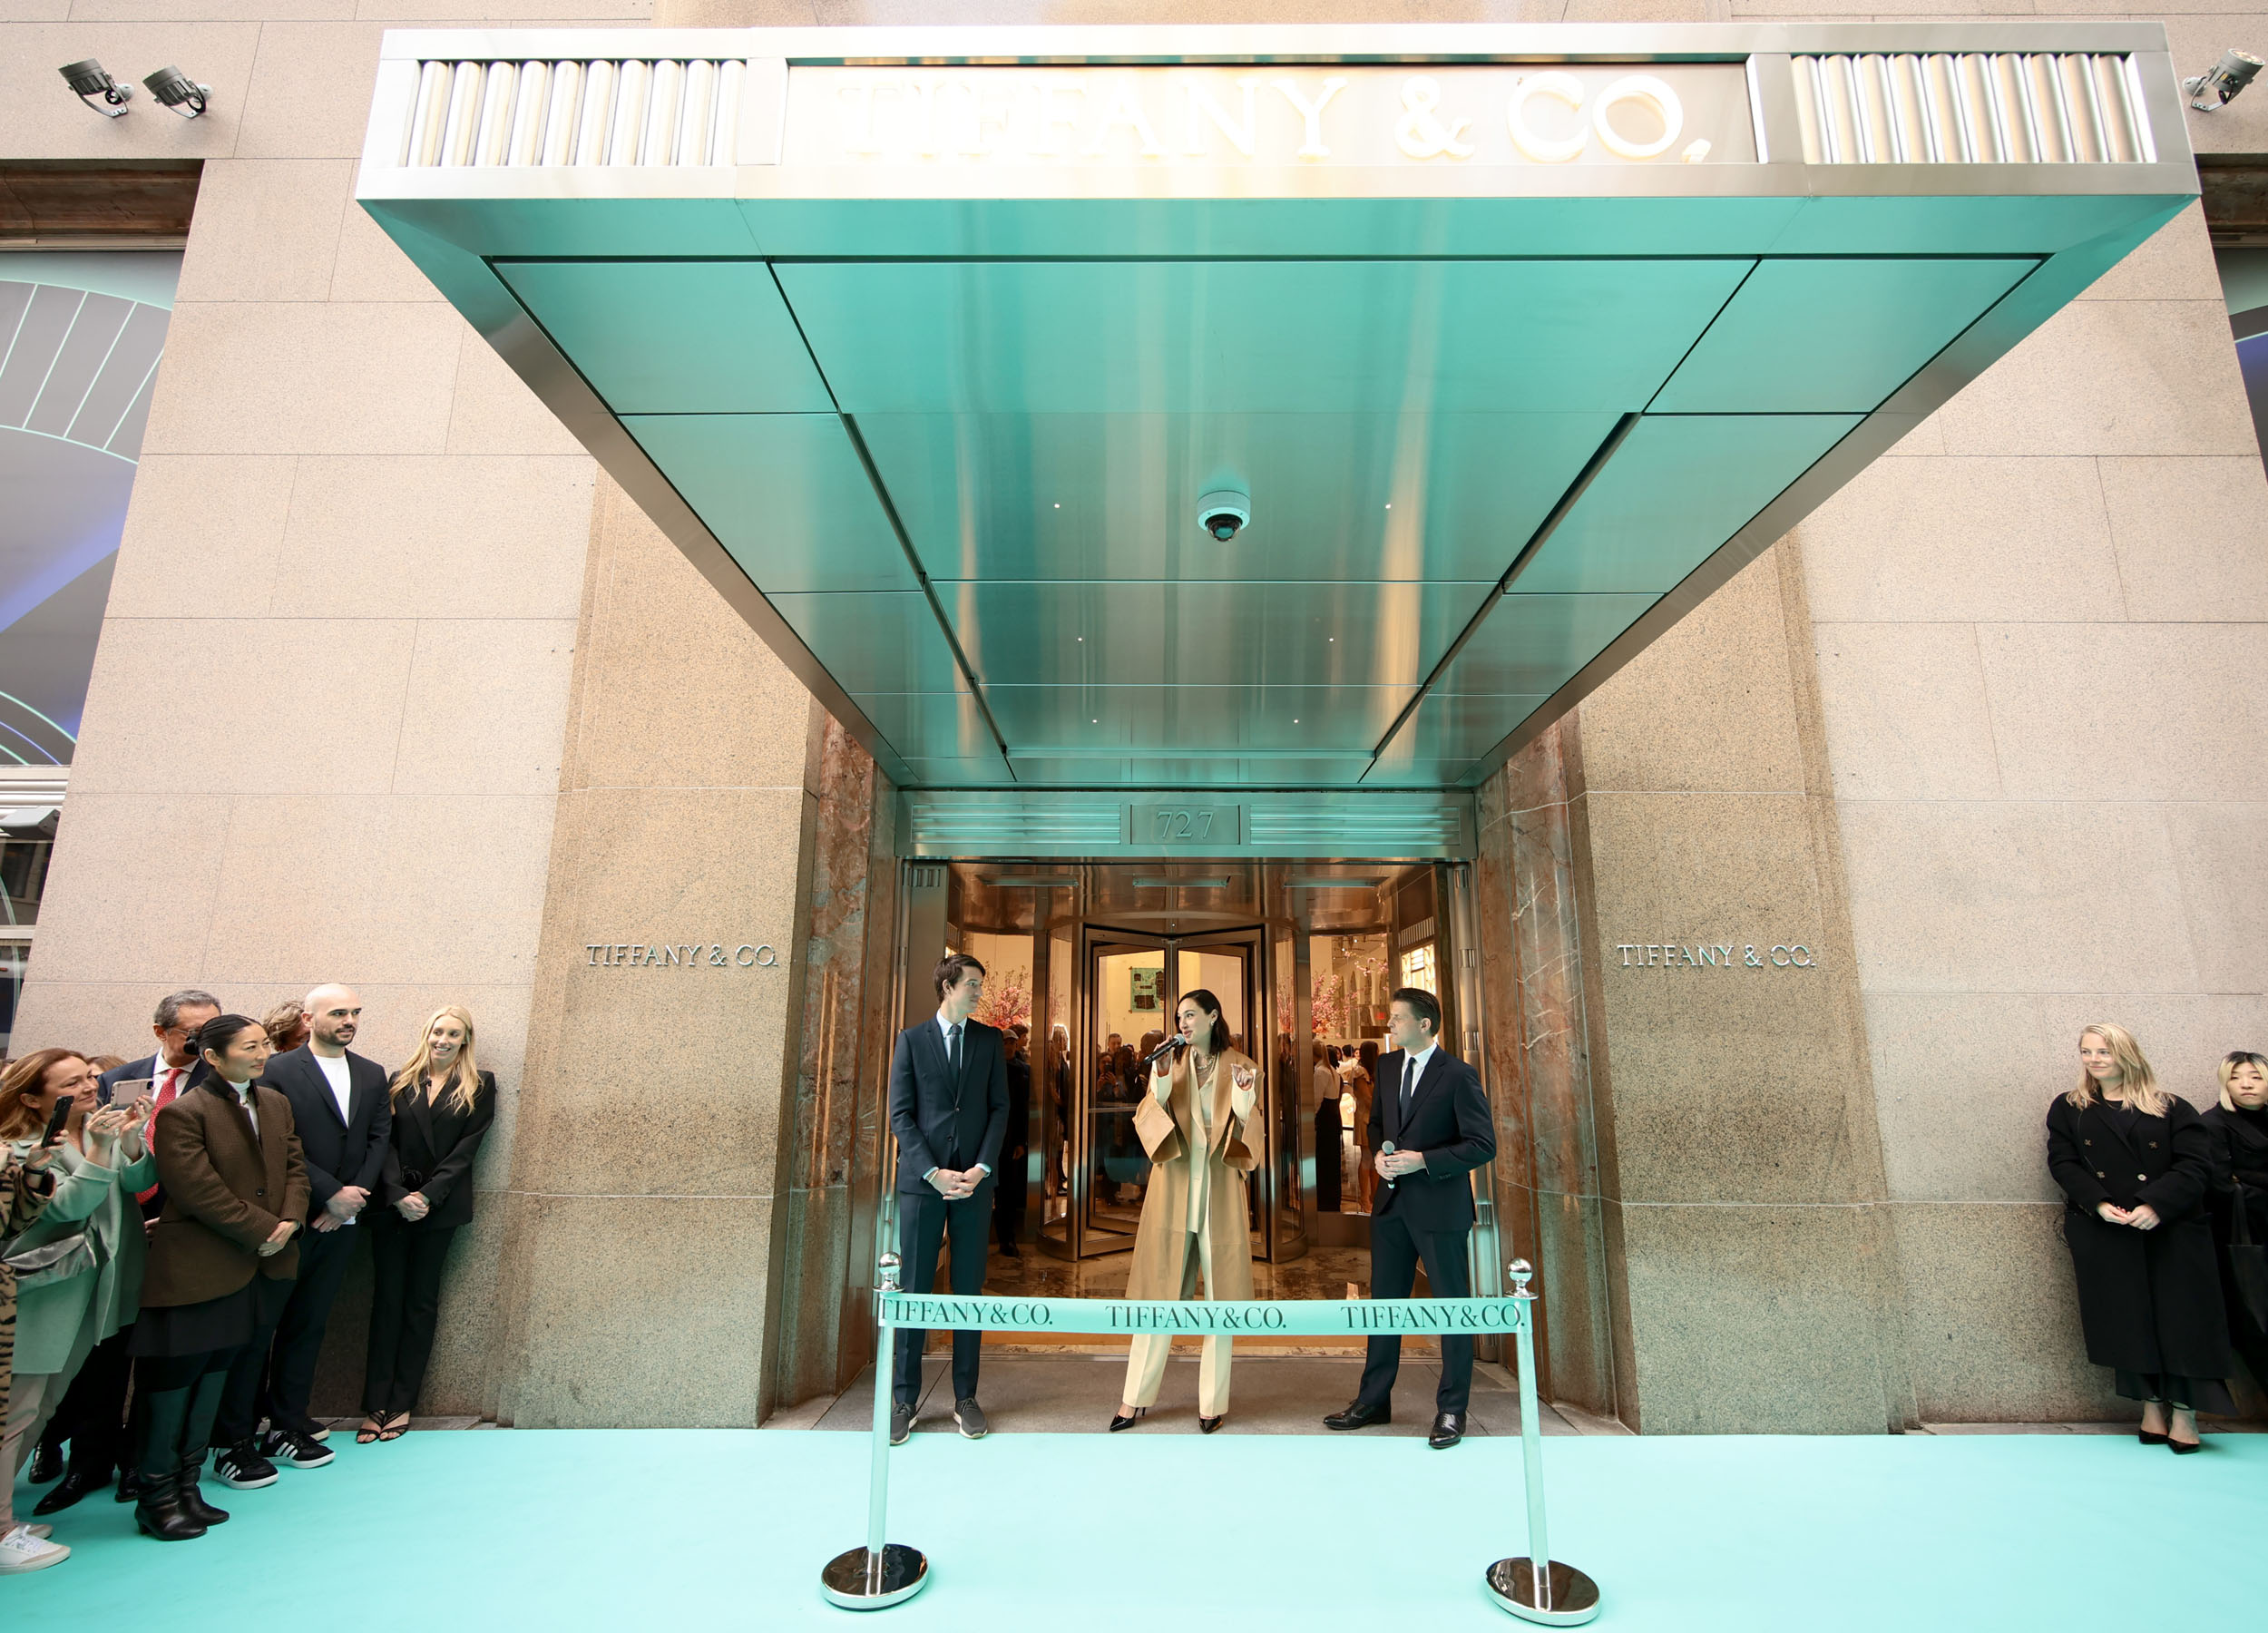 LOOK: Anne Curtis attends reopening of Tiffany's in New York